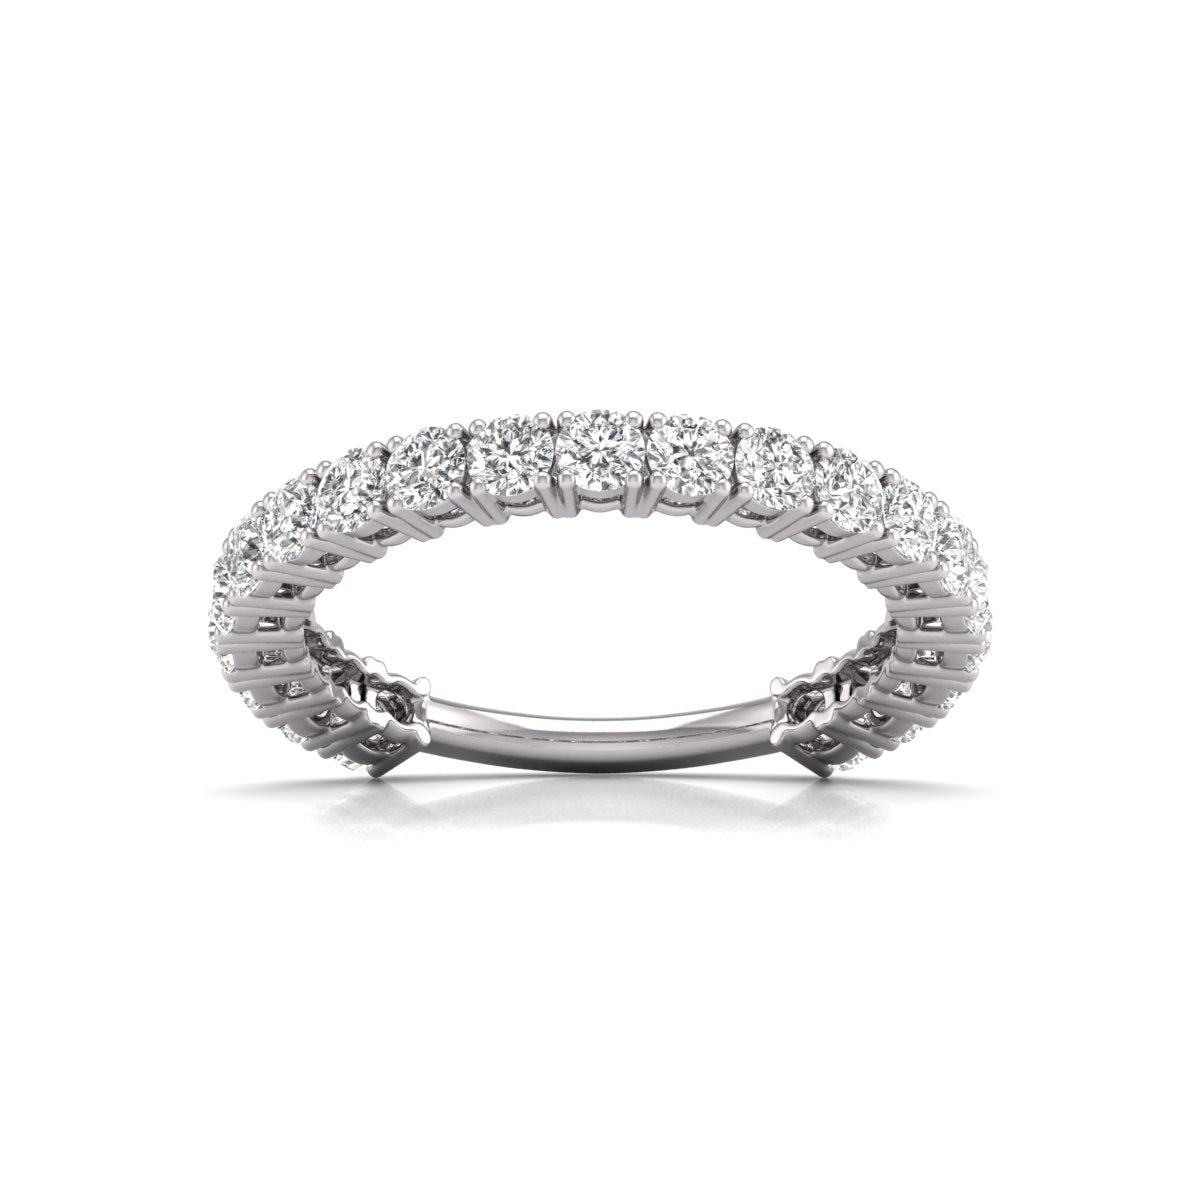 1 Carat TW Natural Diamond Eternity Band in 14K Yellow and White Gold (Clarity I2-I3, Color J-K)